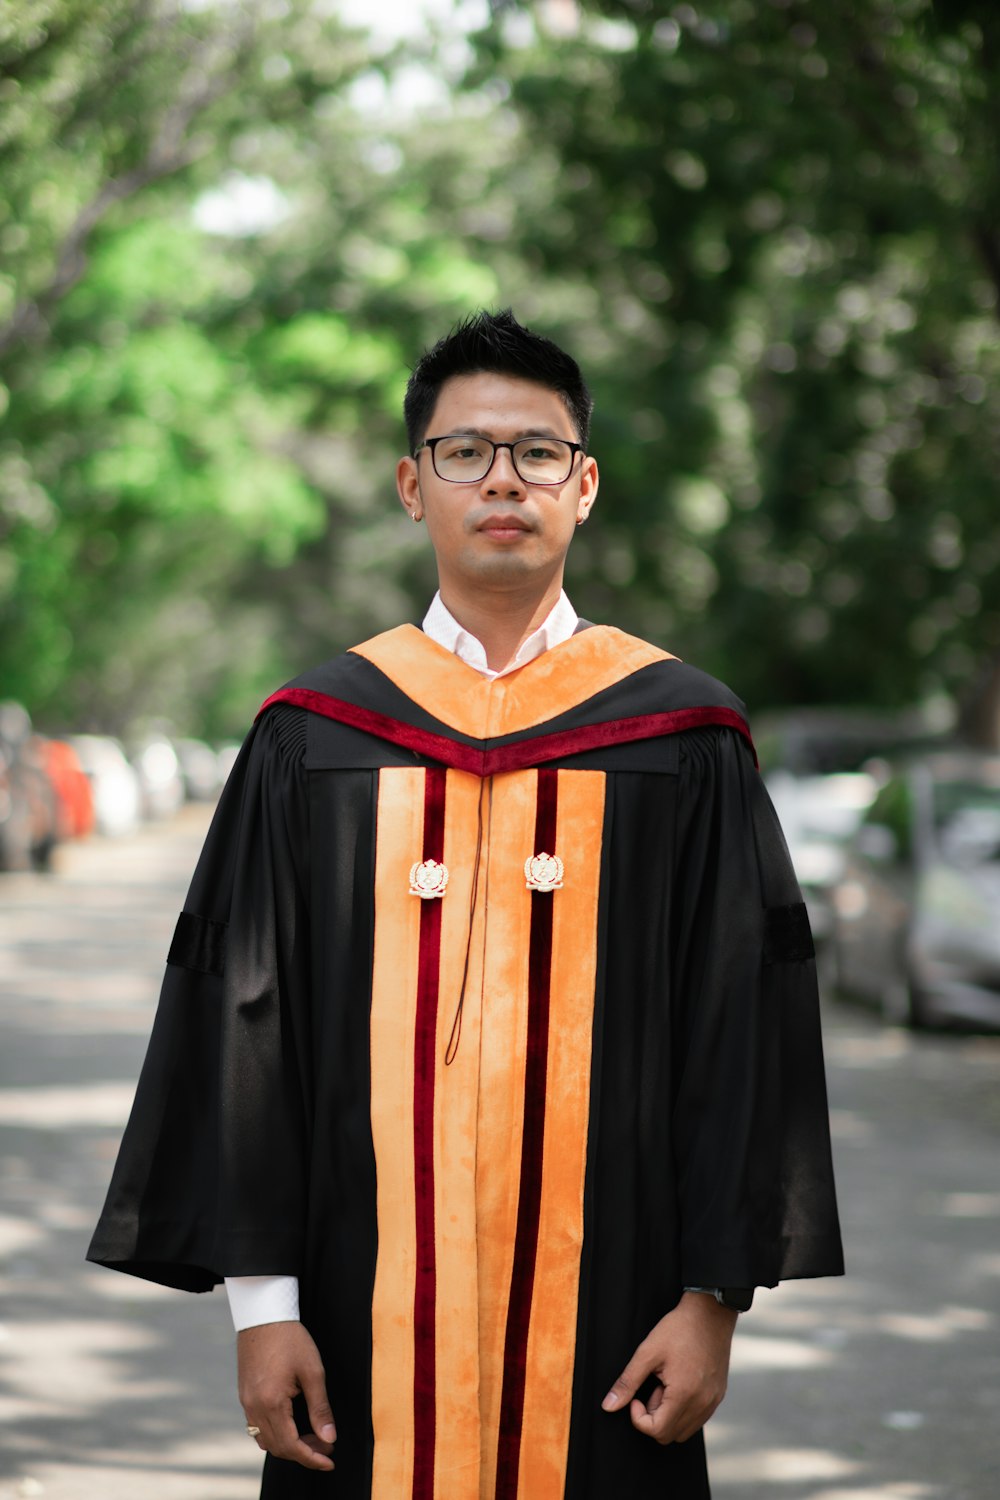 a man in a graduation gown standing on a street